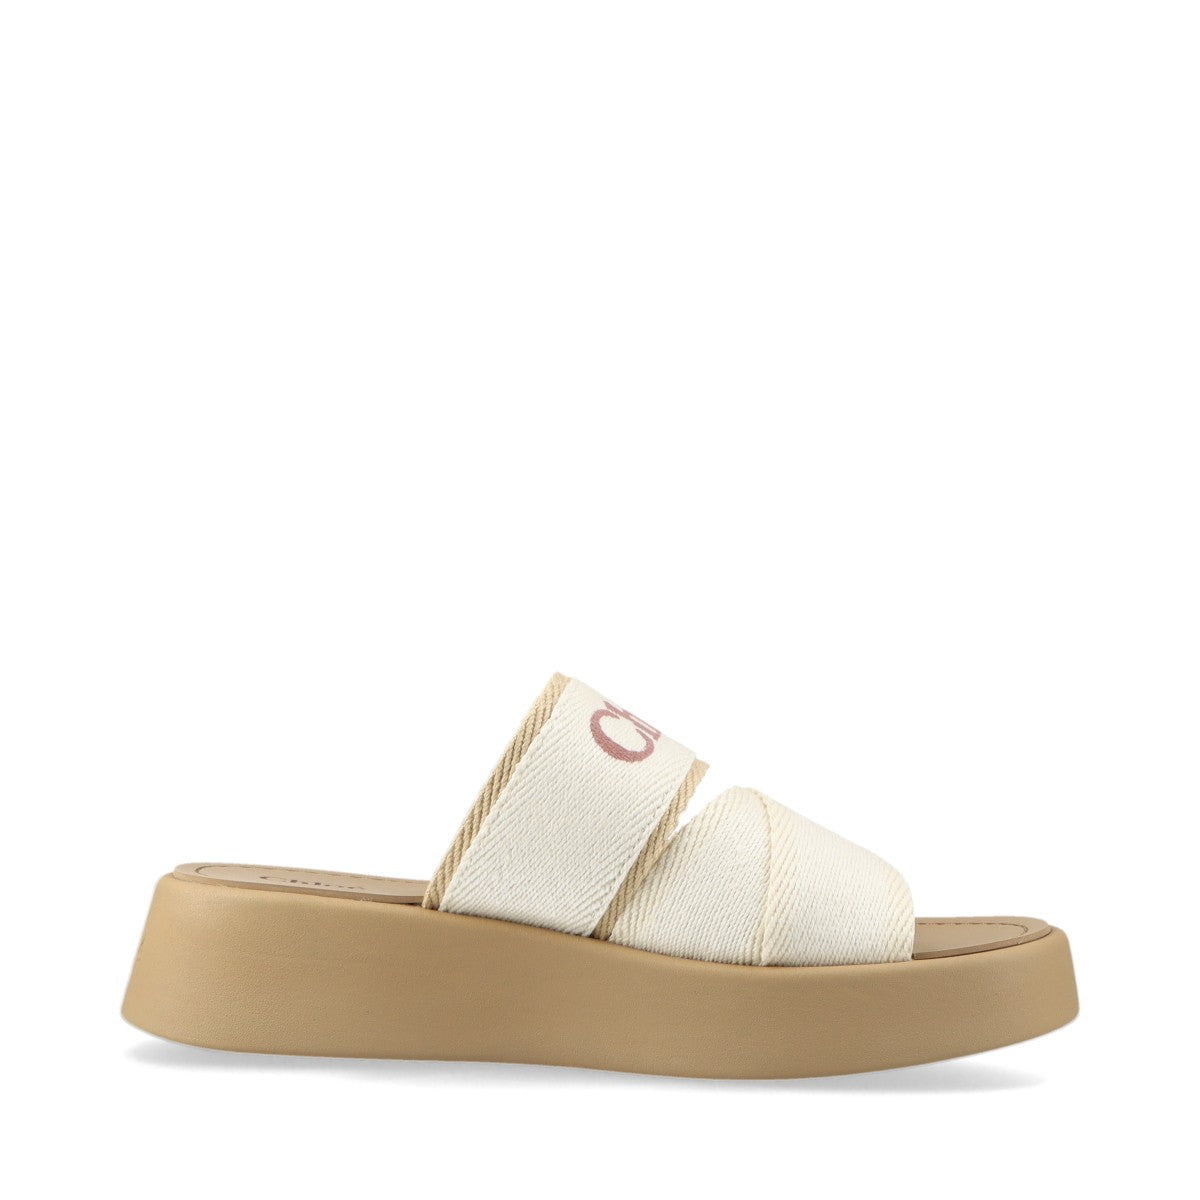 Chloe Rubber x canvas Sandals EU37 Ladies' Ivory MILA box There is a bag